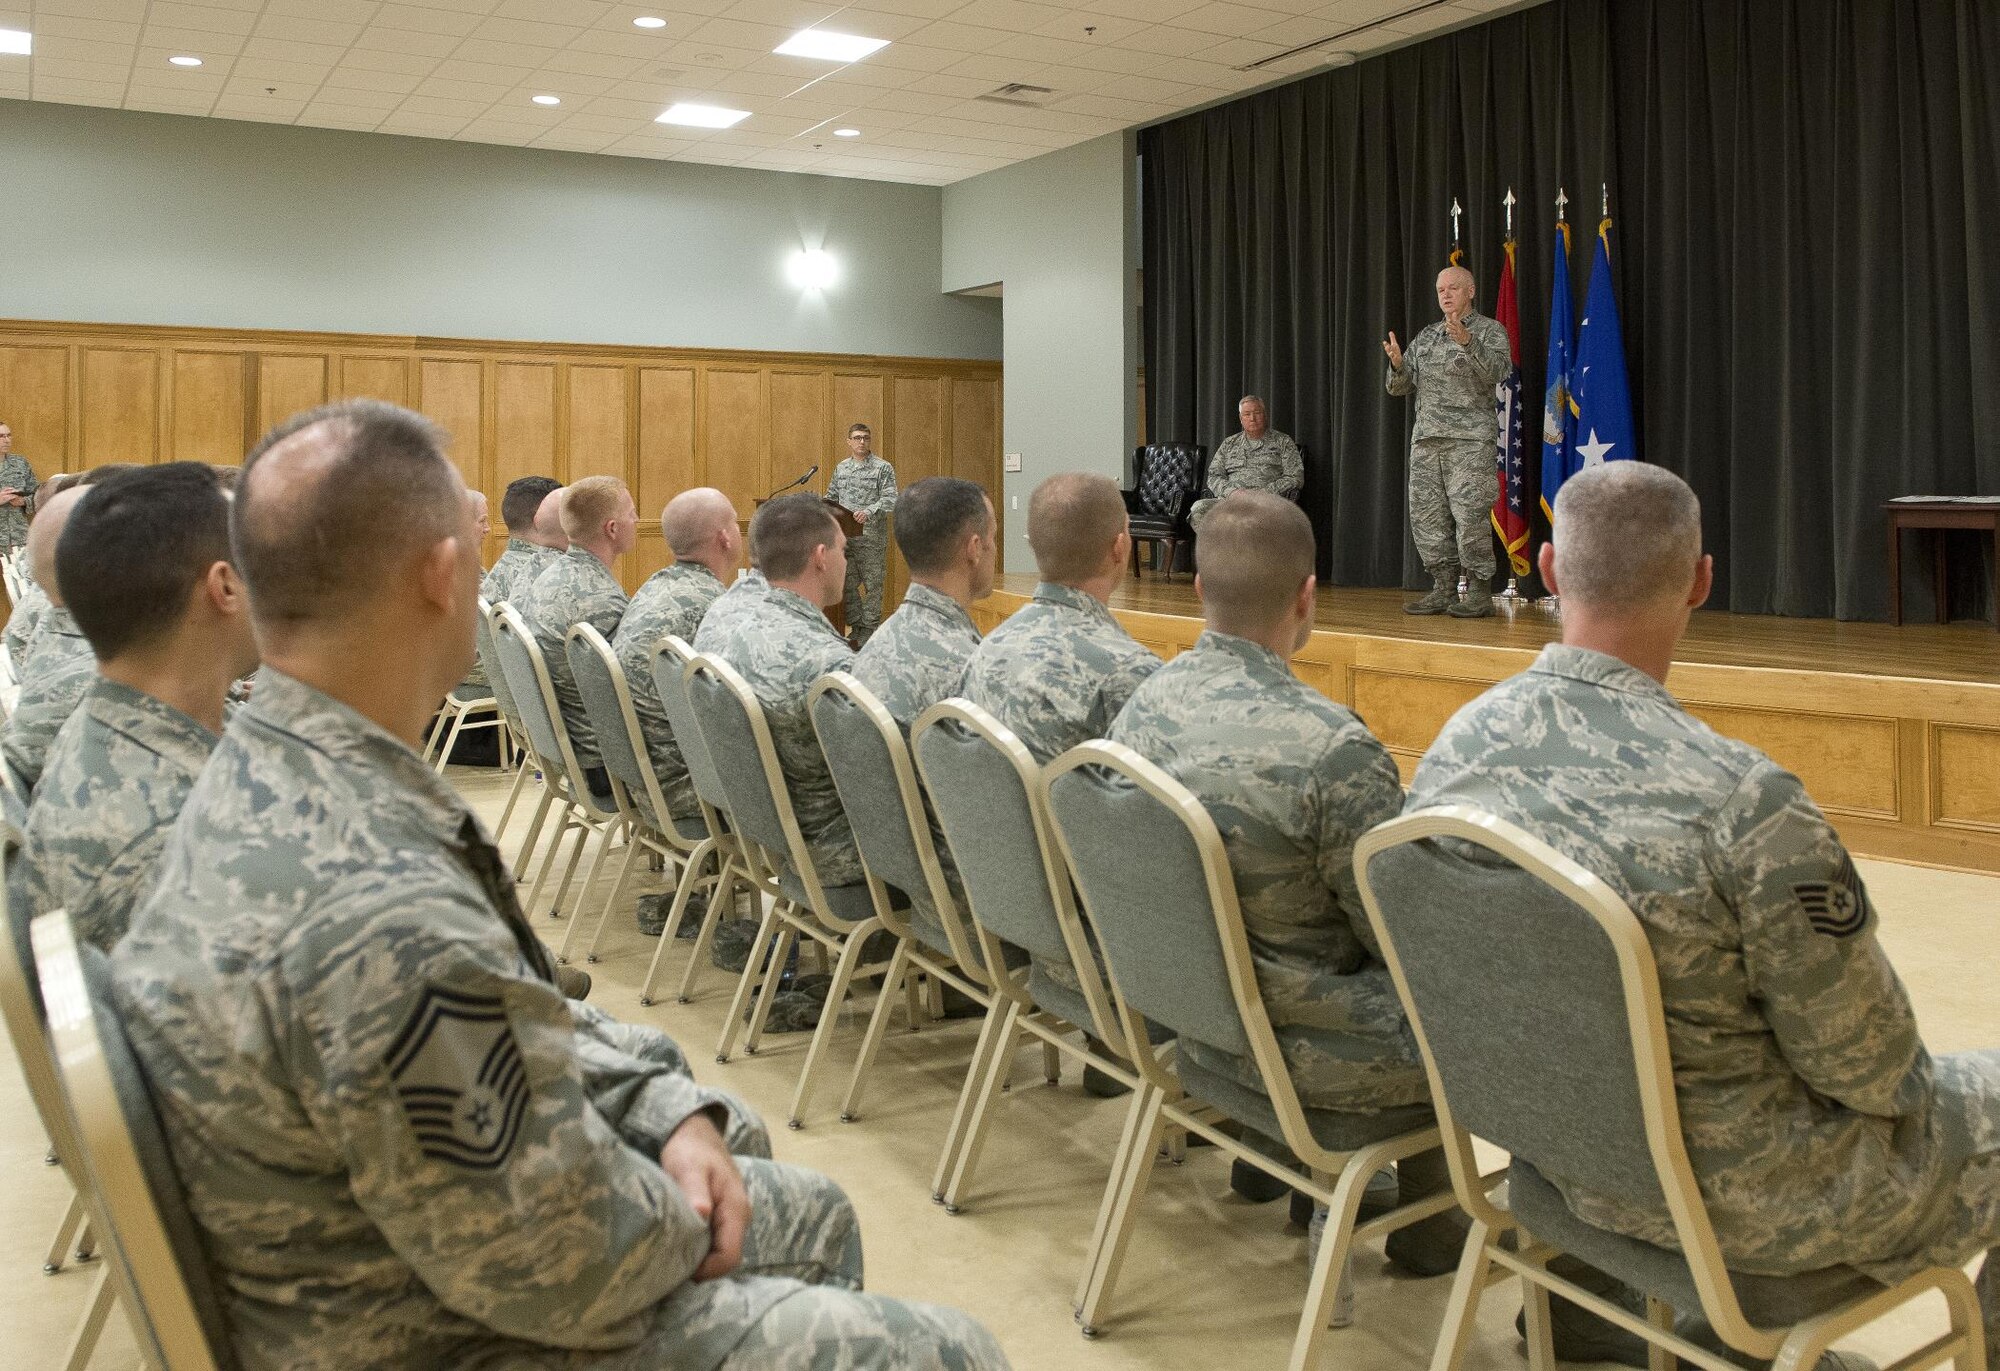 Lt. Gen. L. Scott Rice, director of the Air National Guard, delivers remarks during a graduation ceremony for the first class of the Air Force's Cyber Skills Validation Course held March 29, 2017, at Little Rock Air Force Base, Arkansas. The course is designed to take ANG Airmen with preexisting cyber skills and accelerate their training in the Cyber Warfare career field. (U.S. Air National Guard photo by Master Sgt. Marvin R. Preston)